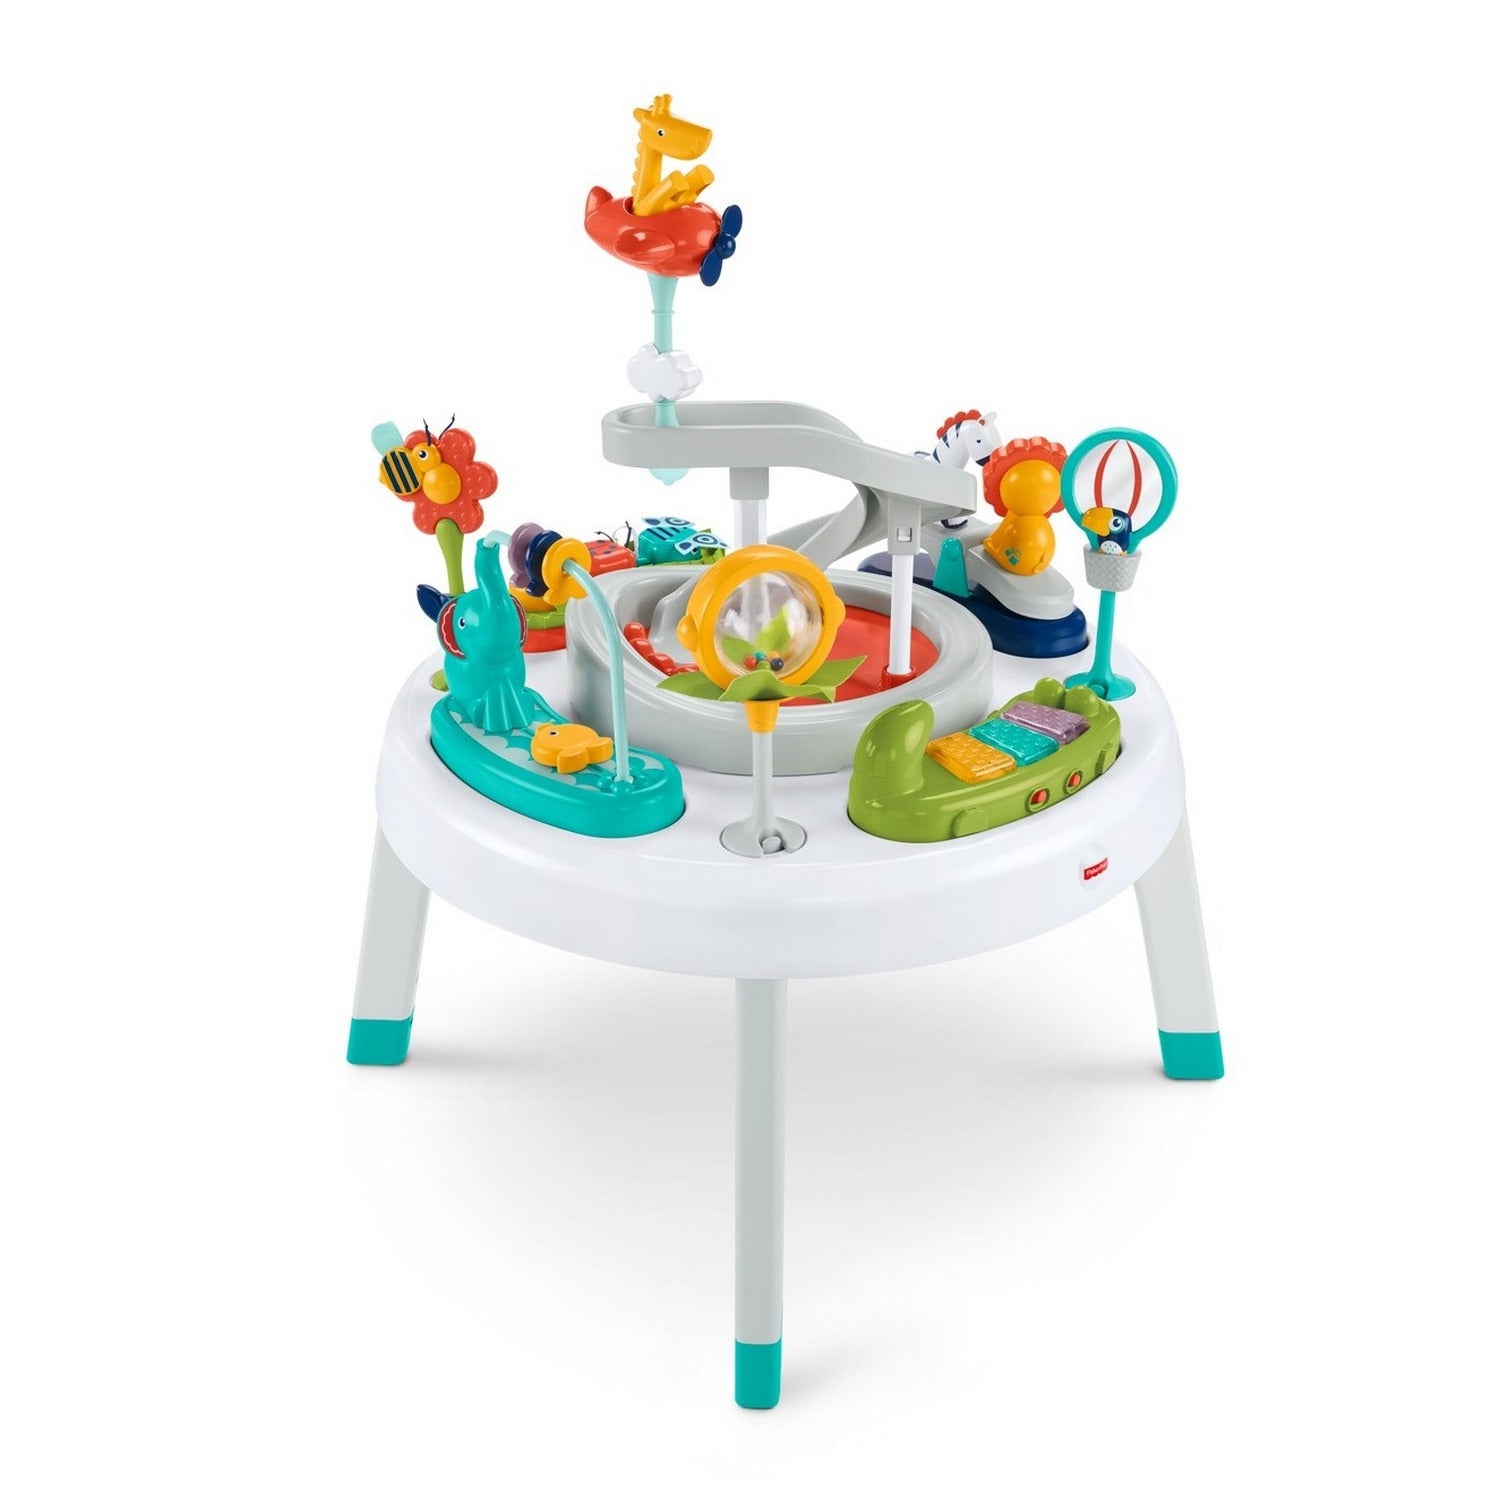 Fisher-Price 2-in-1 Sit-to-Stand Activity Center Spin 'n Play, Safari